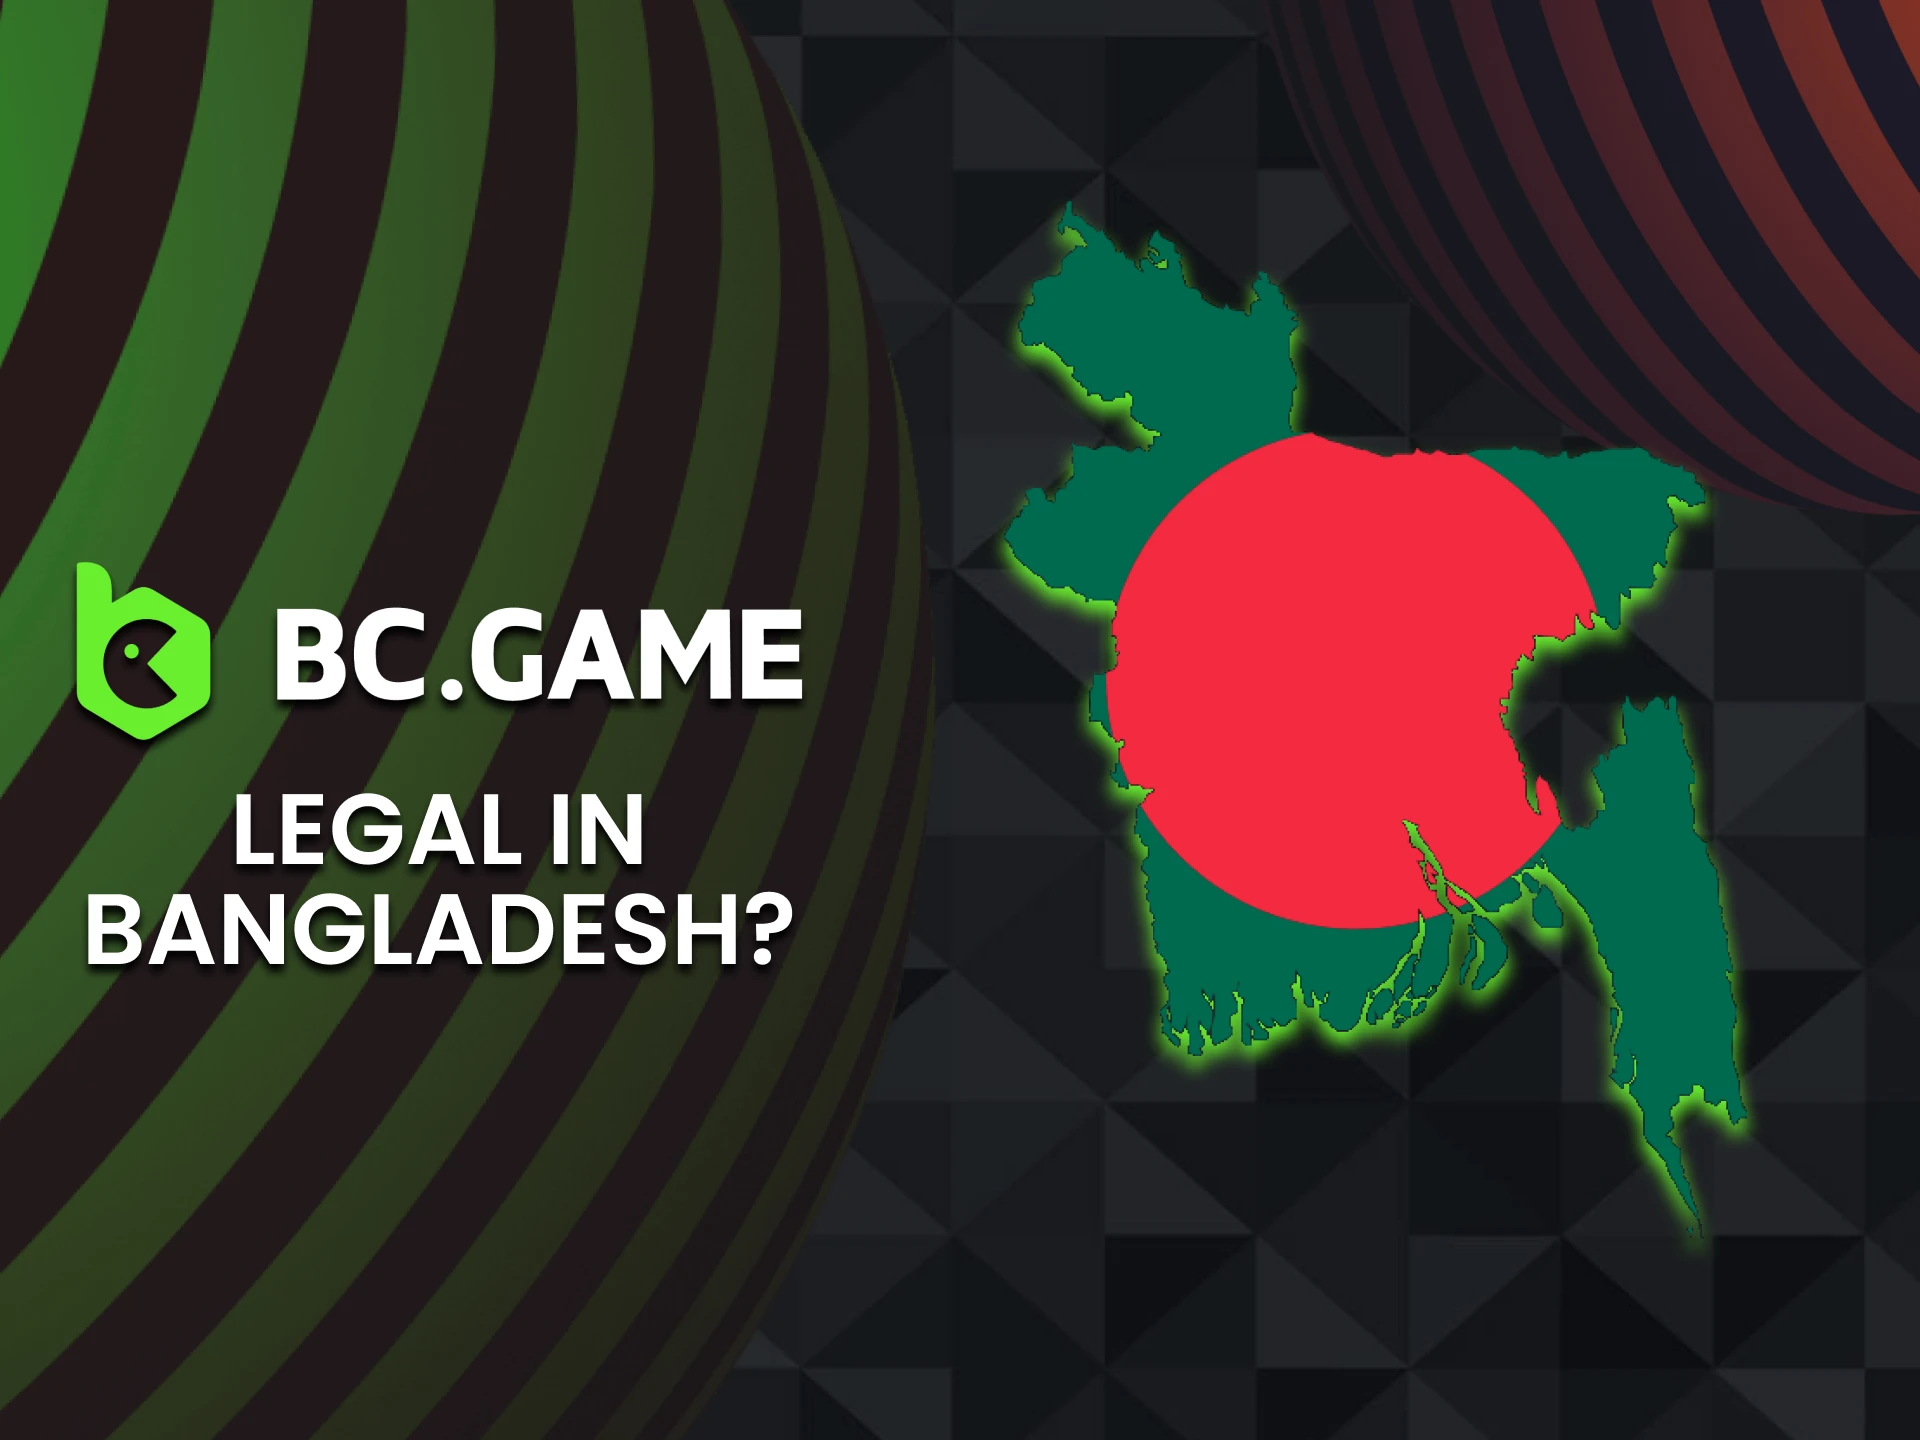 BCGame is legal for Bangladeshi users.